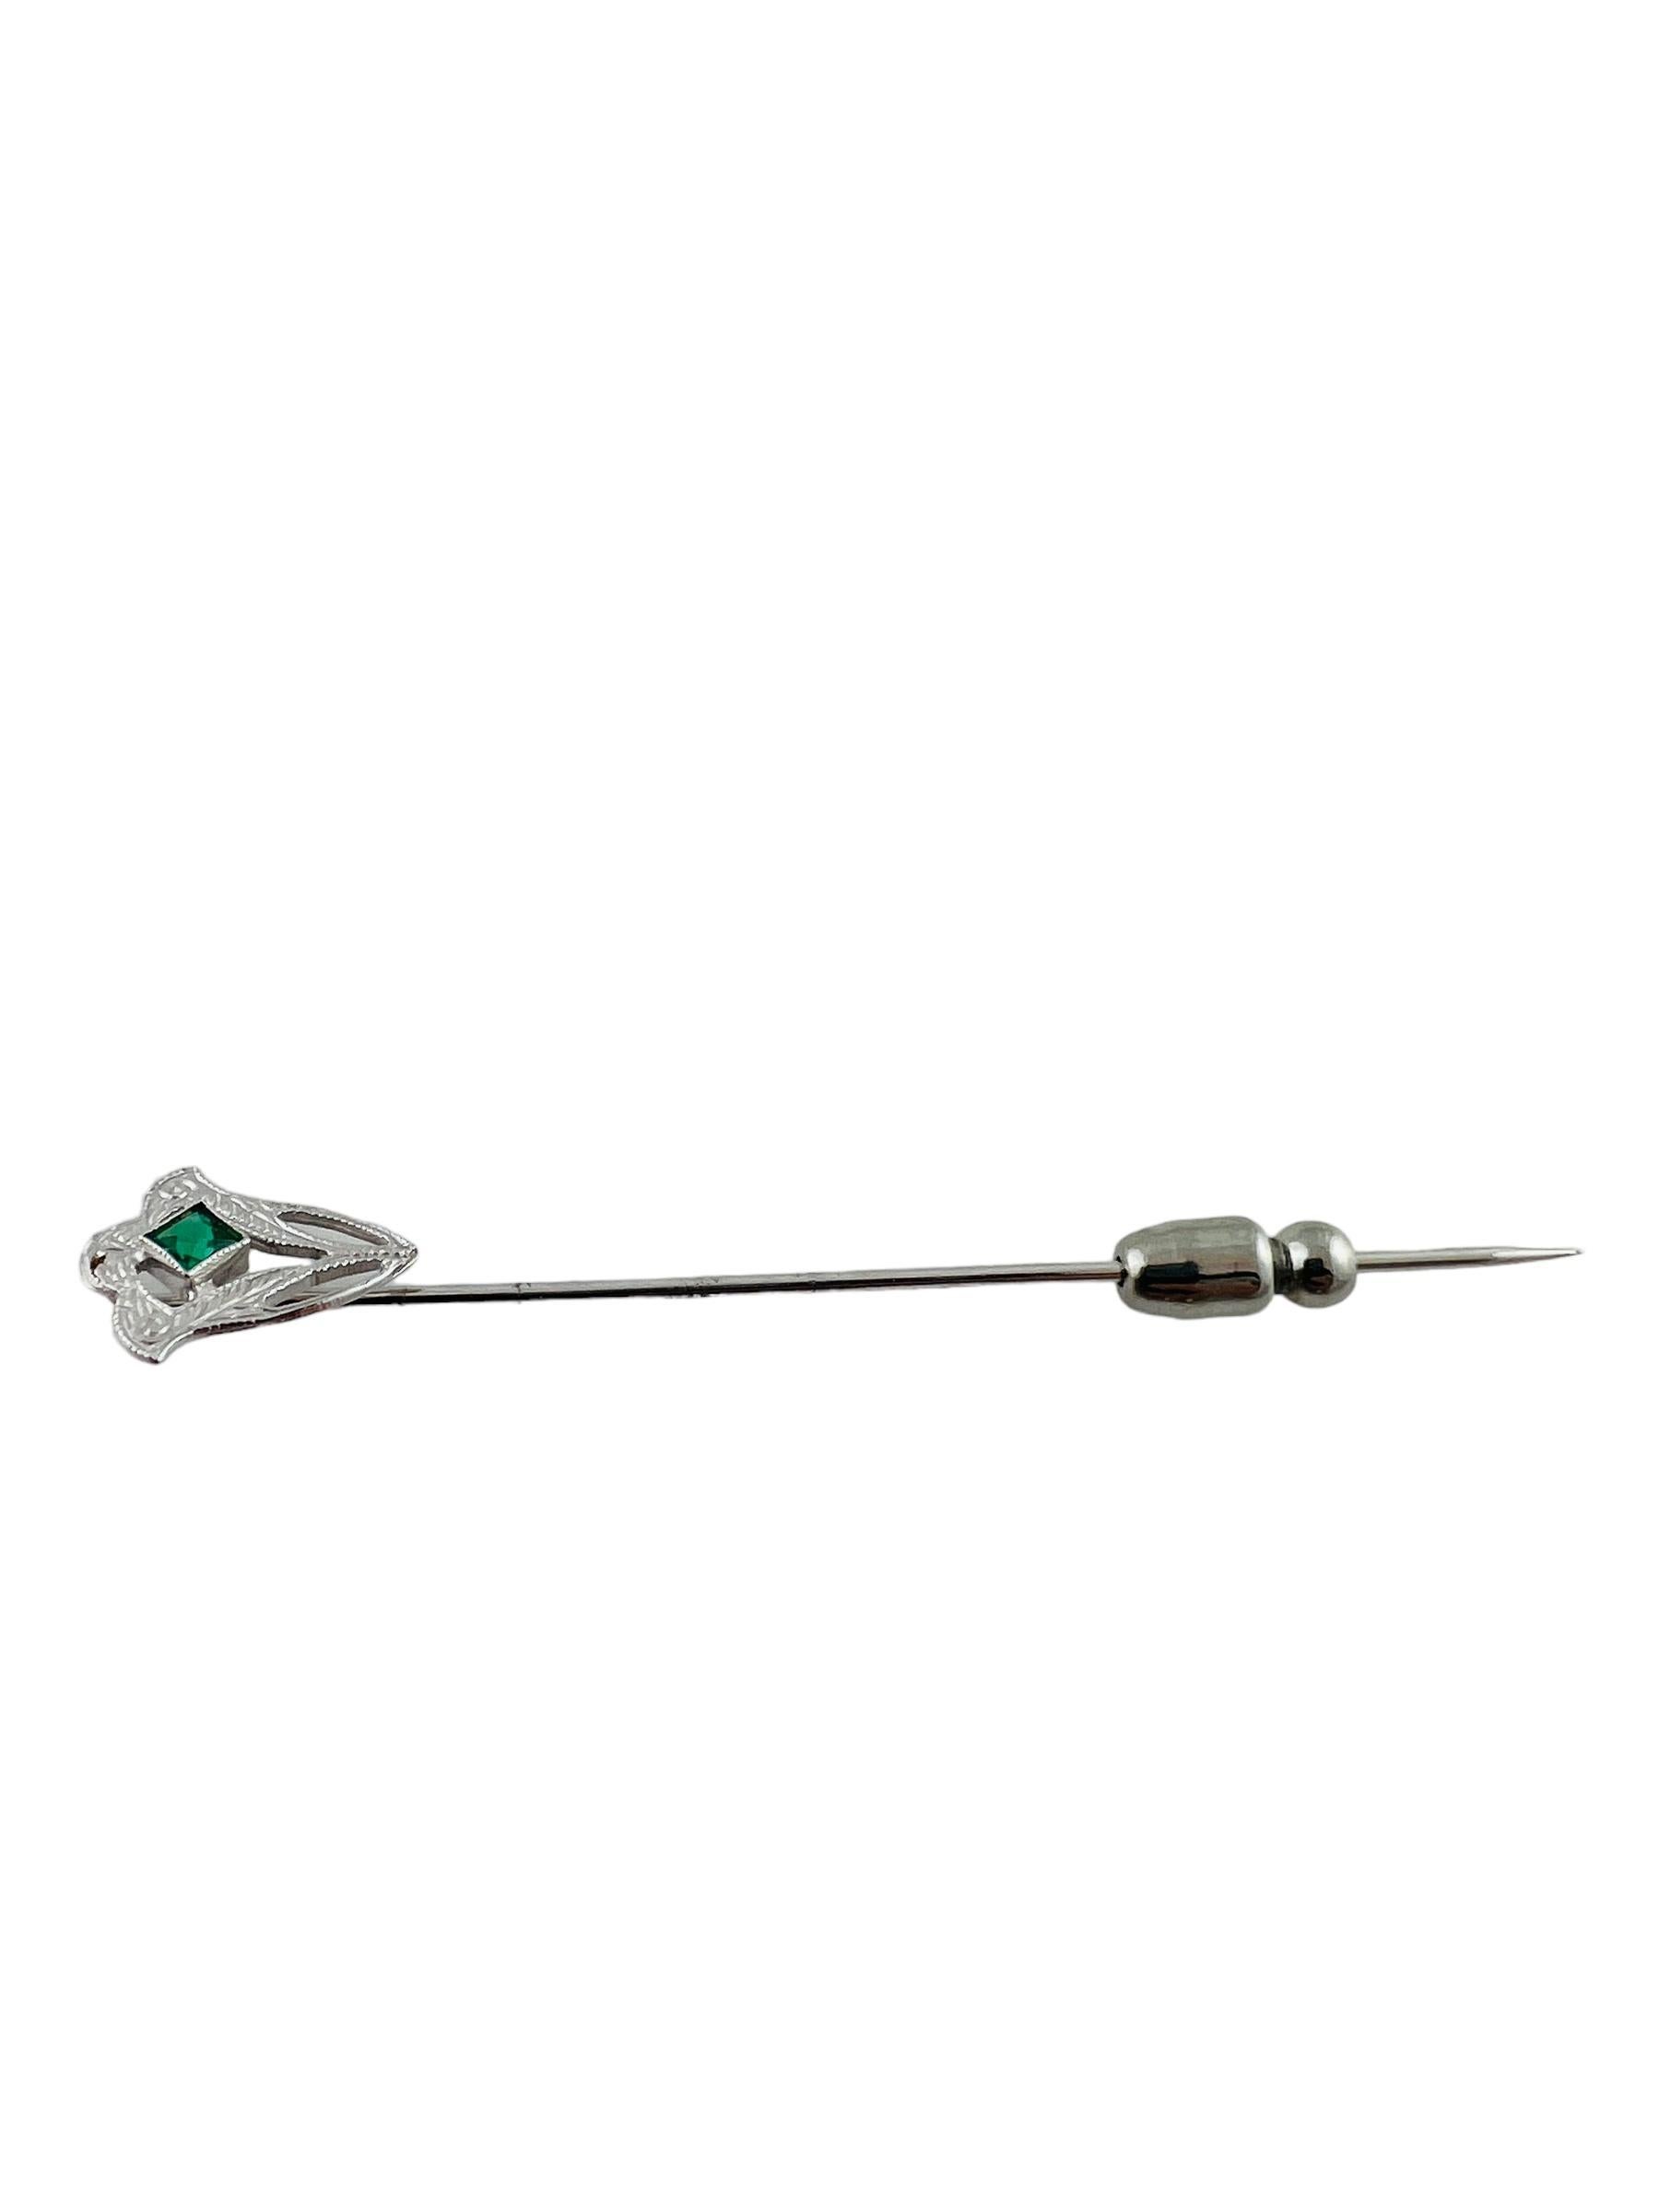 Women's 10K White Gold Stick Pin with Green Glass Stone #15688 For Sale